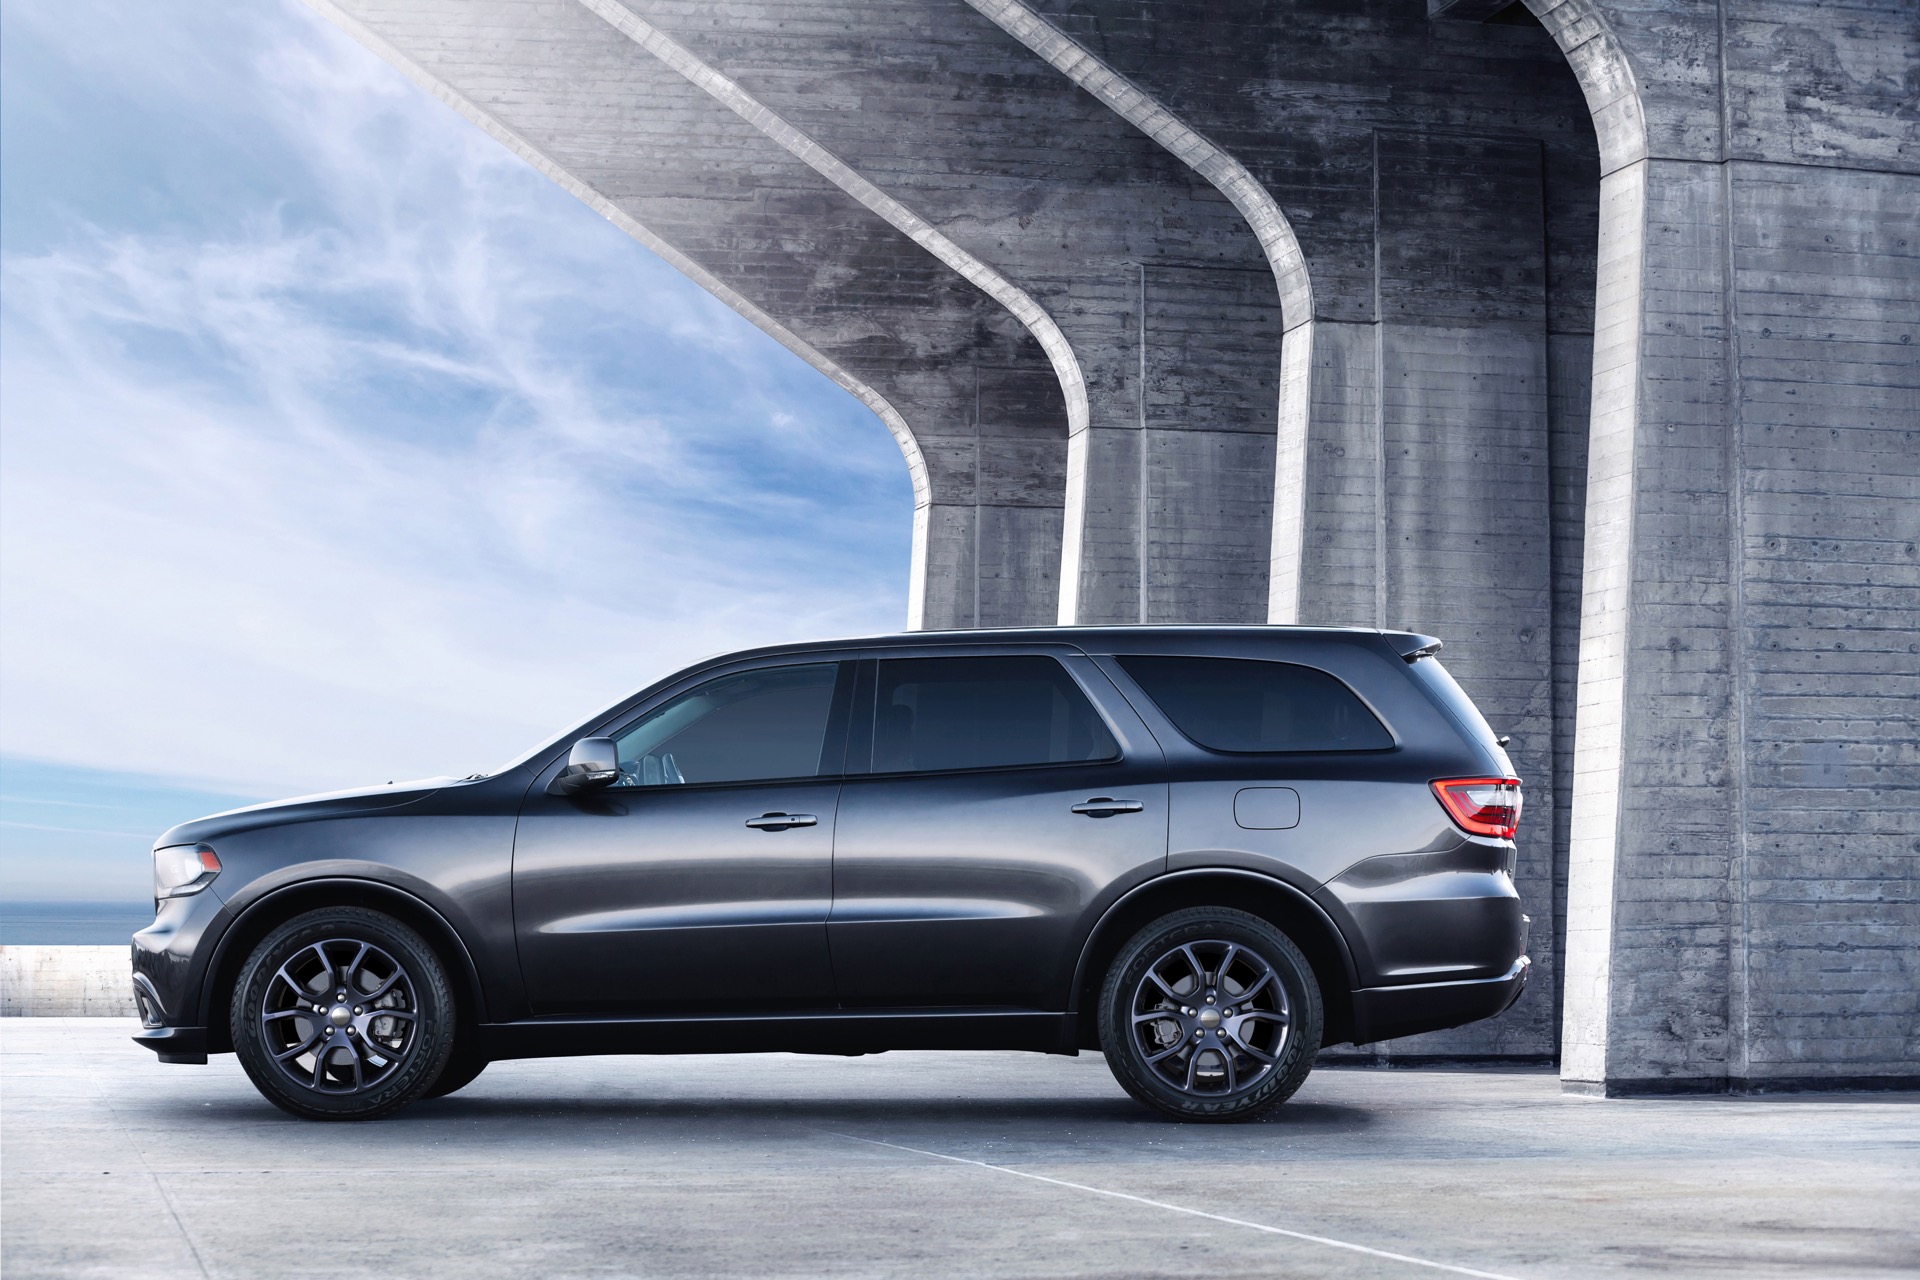 2016 Dodge Durango Review Ratings Specs Prices And